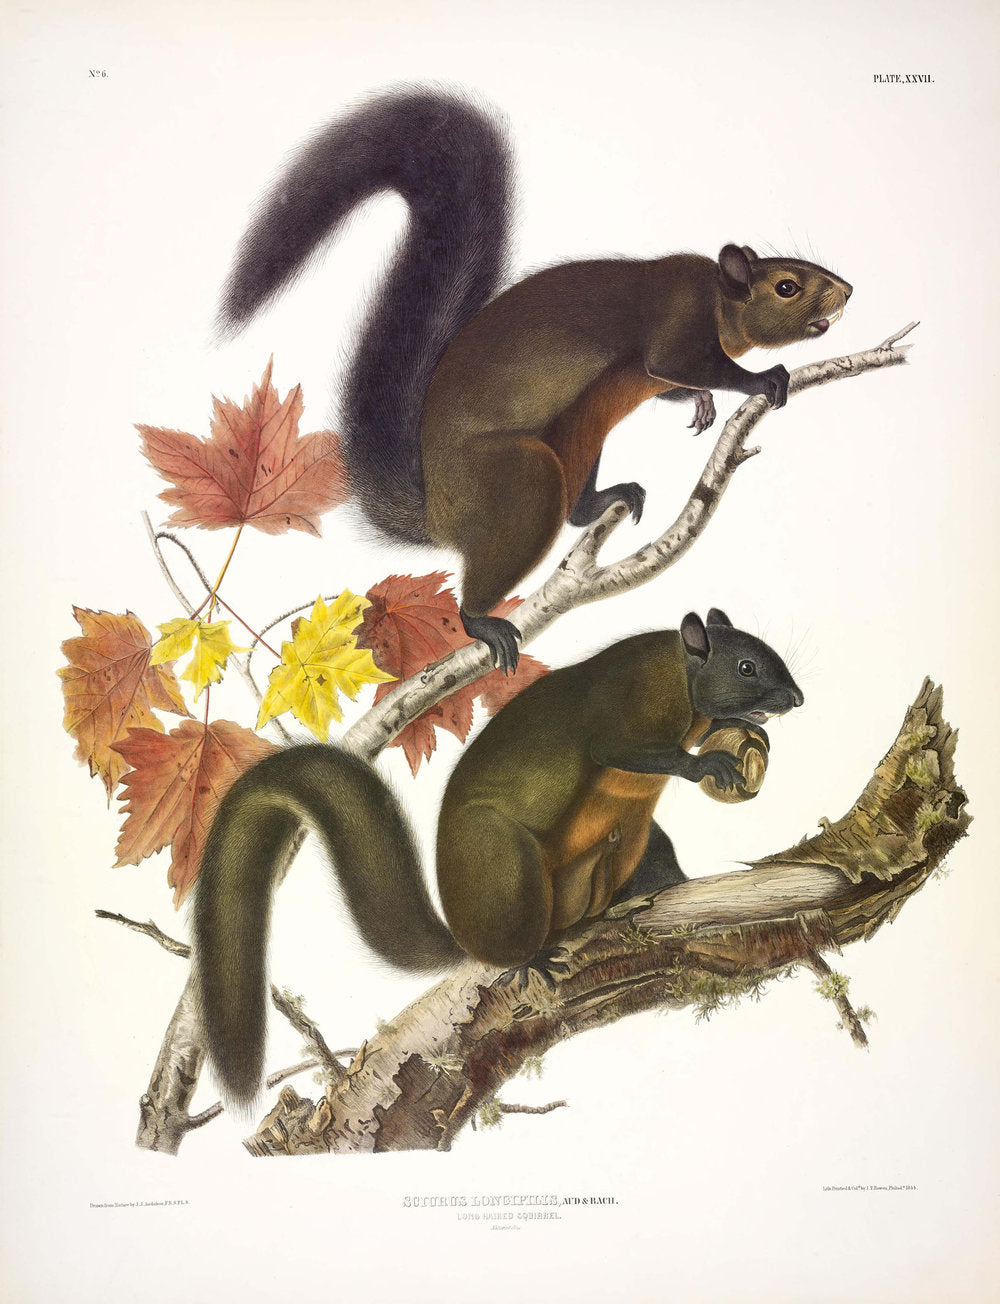 Painted by John James Audubon (1785-1851) with background likely by Victor Gifford Audubon (1809-1860)  Plate XXVII - Long Haired Squirrel  From: Viviparous Quadrupeds of North America  New York: 1845-1848  Hand colored lithograph  Sheet size: 21 ¼” x 27”